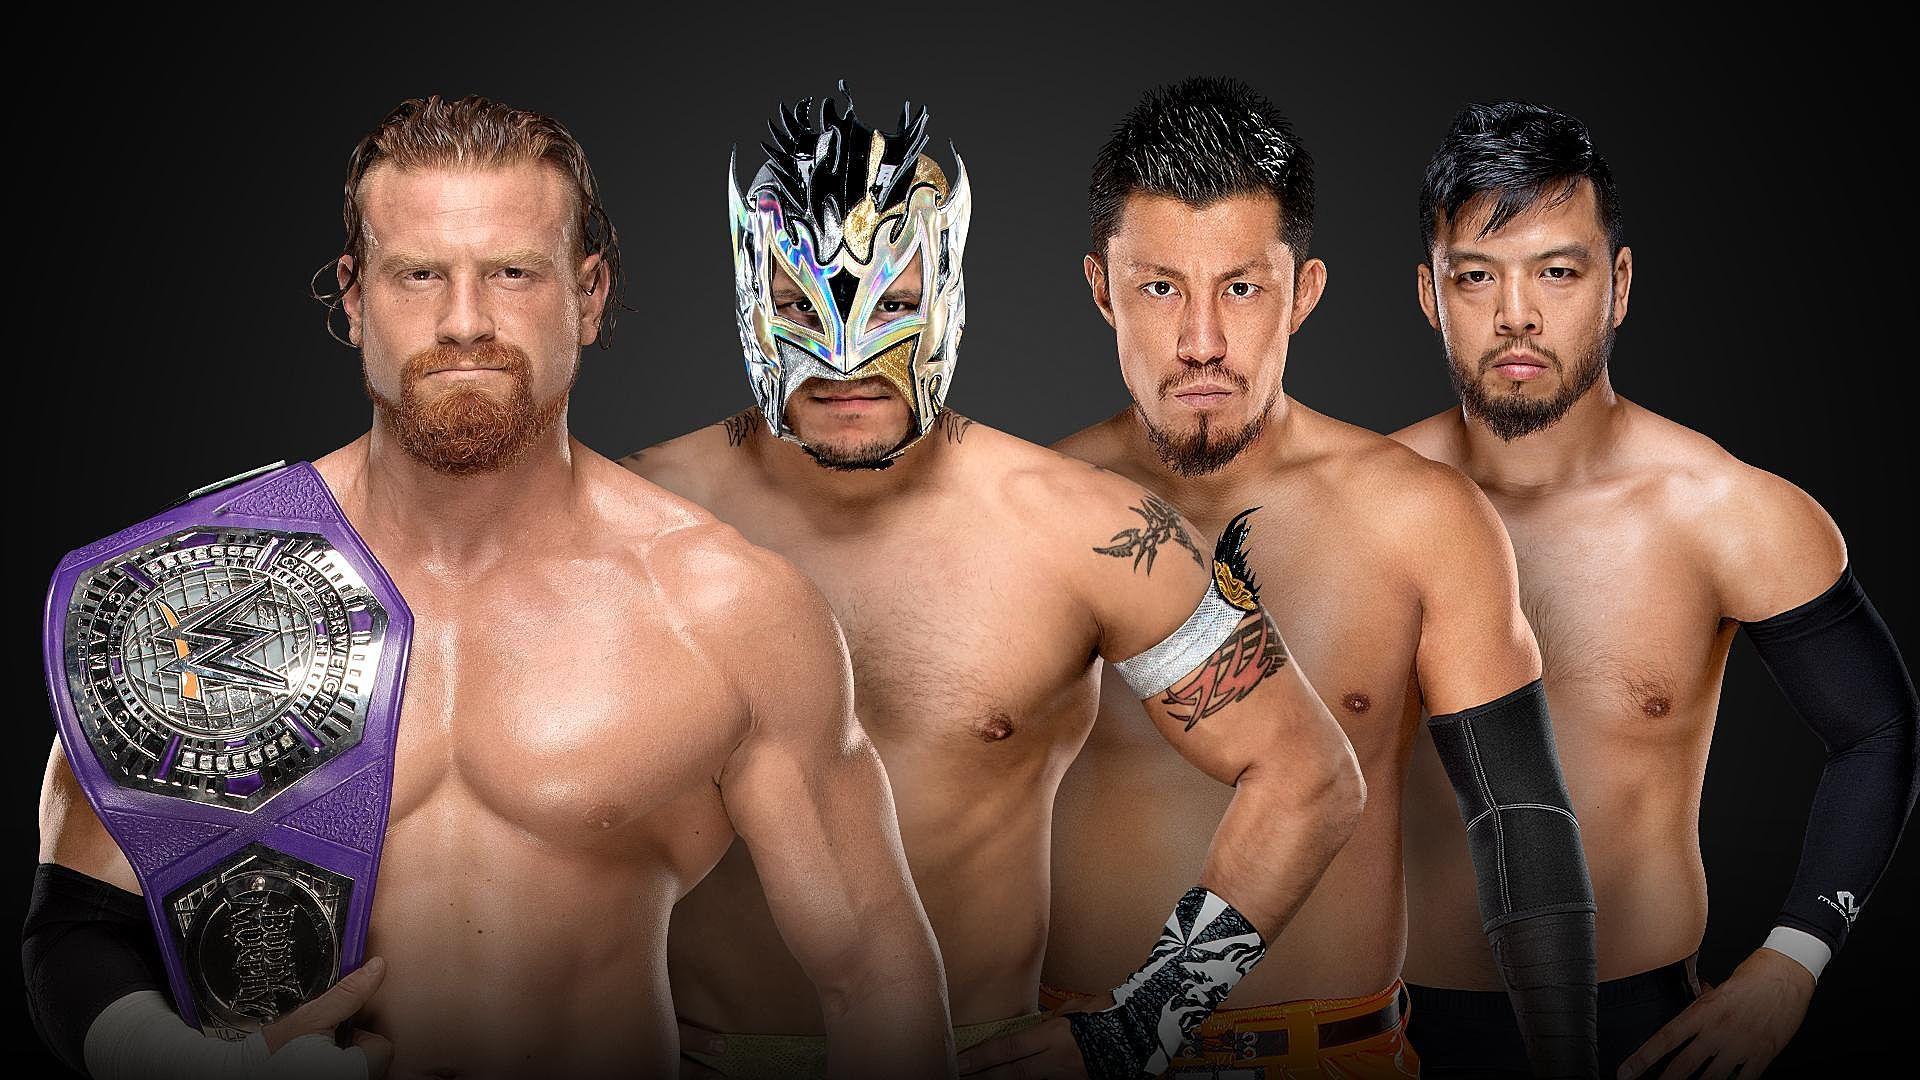 WWE Royal Rumble 2019: Full Confirmed Card and Match Predictions